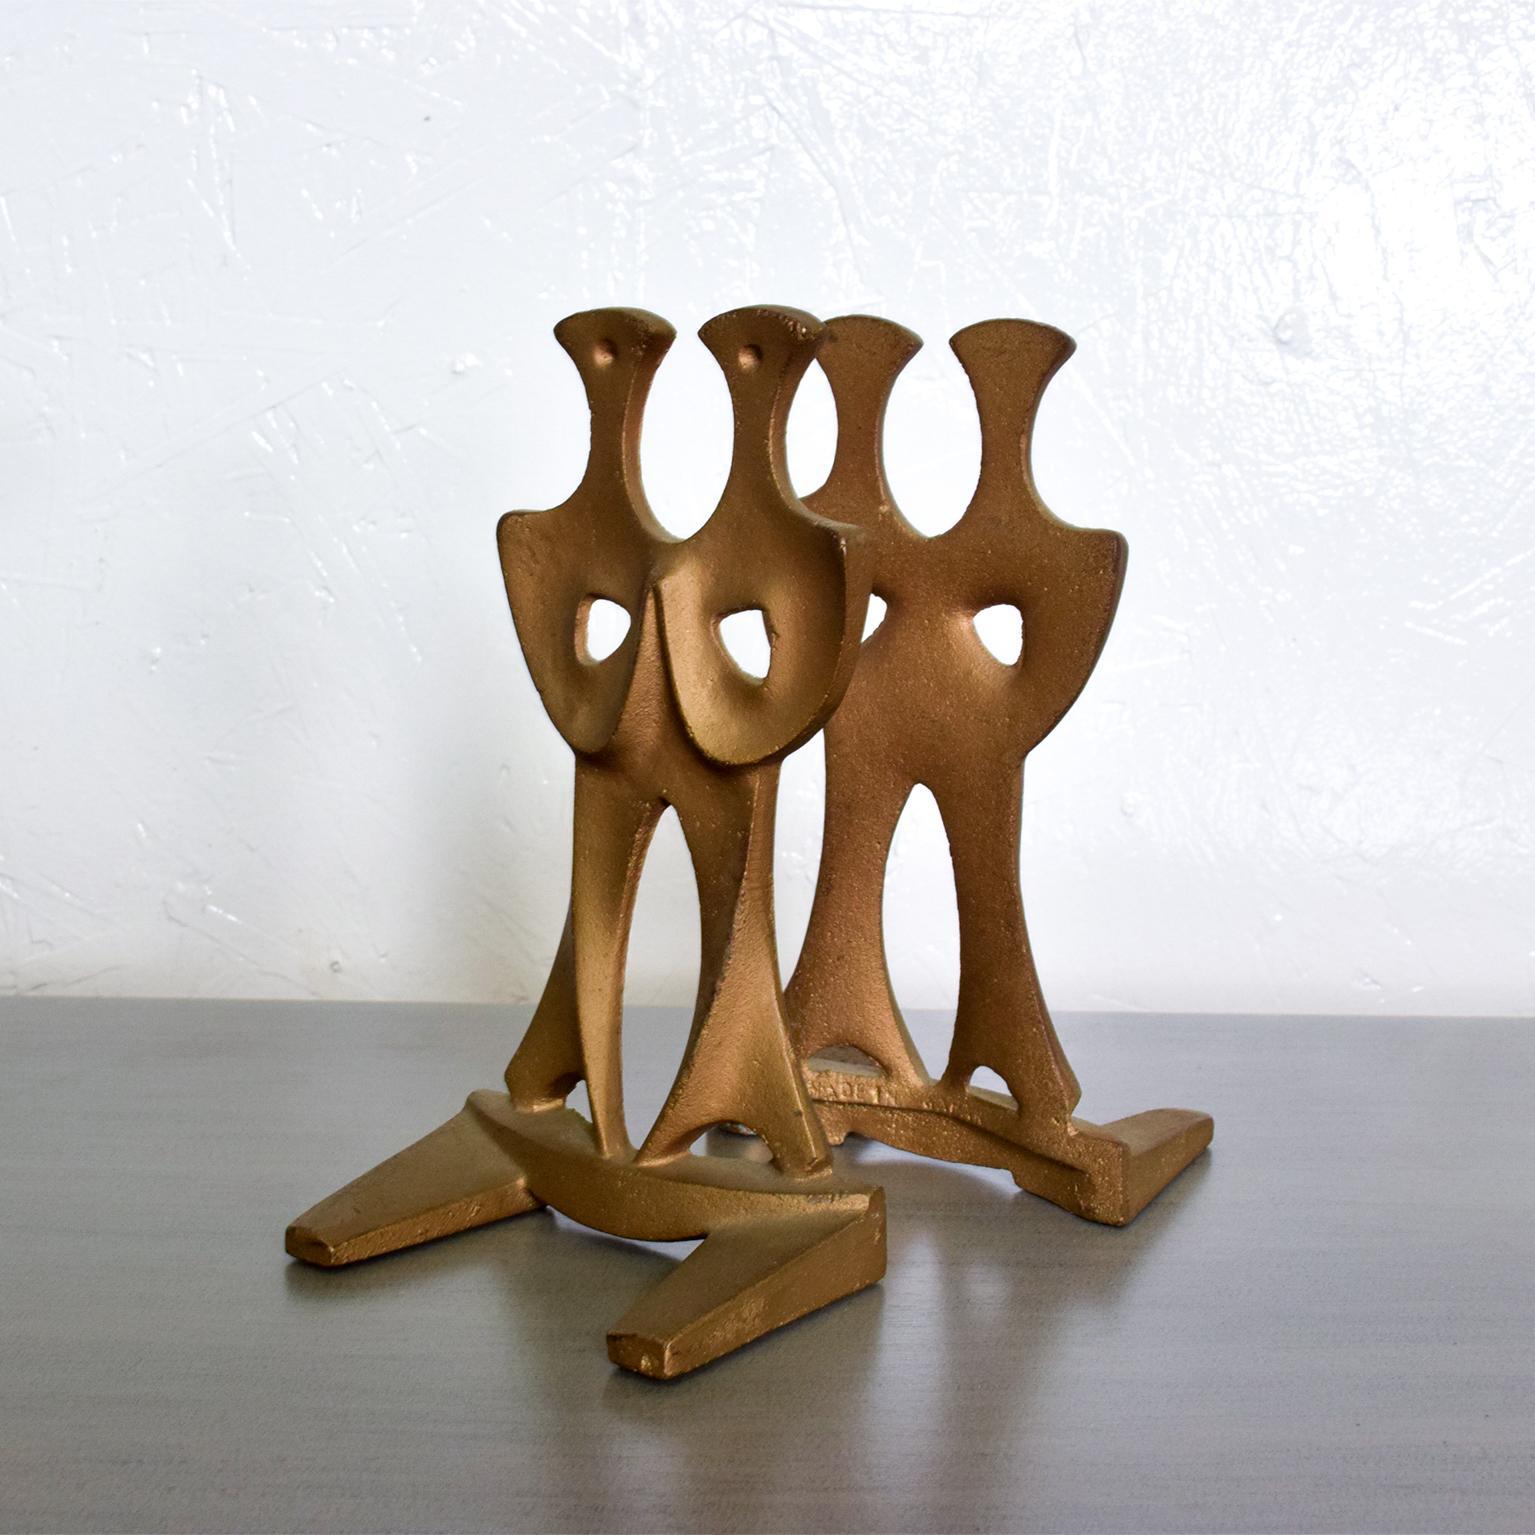 Japanese Mid-Century Modern Cast Iron Sculptural Bookends Made in Japan